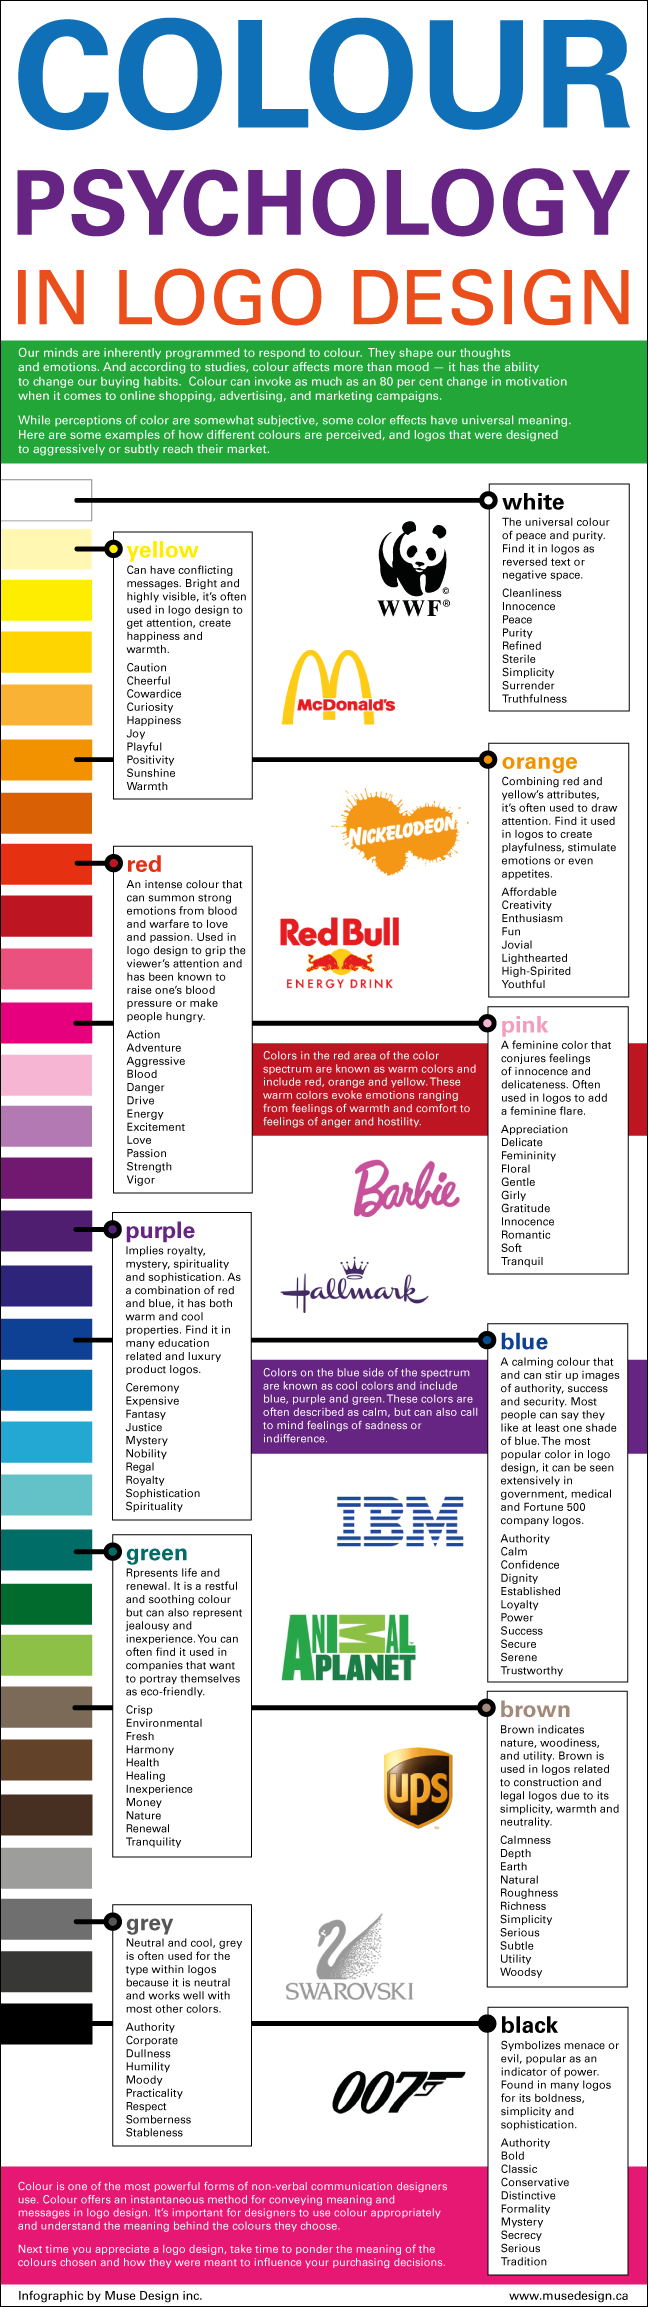 Color Theory, Black for Logos and Marketing